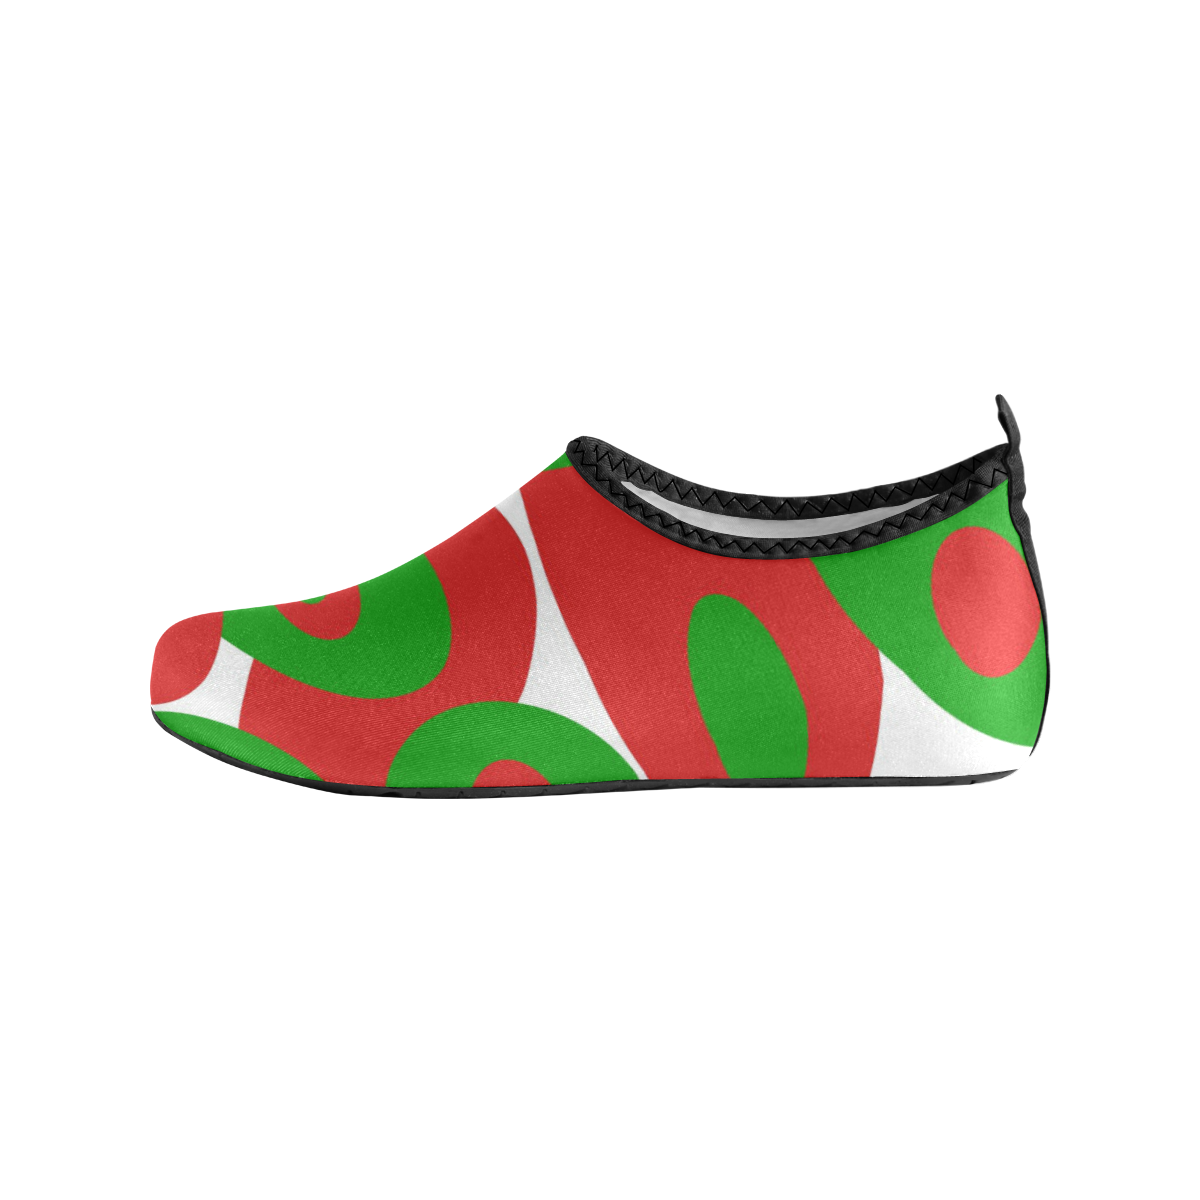 Red and Green Orbs Women's Slip-On Water Shoes (Model 056)